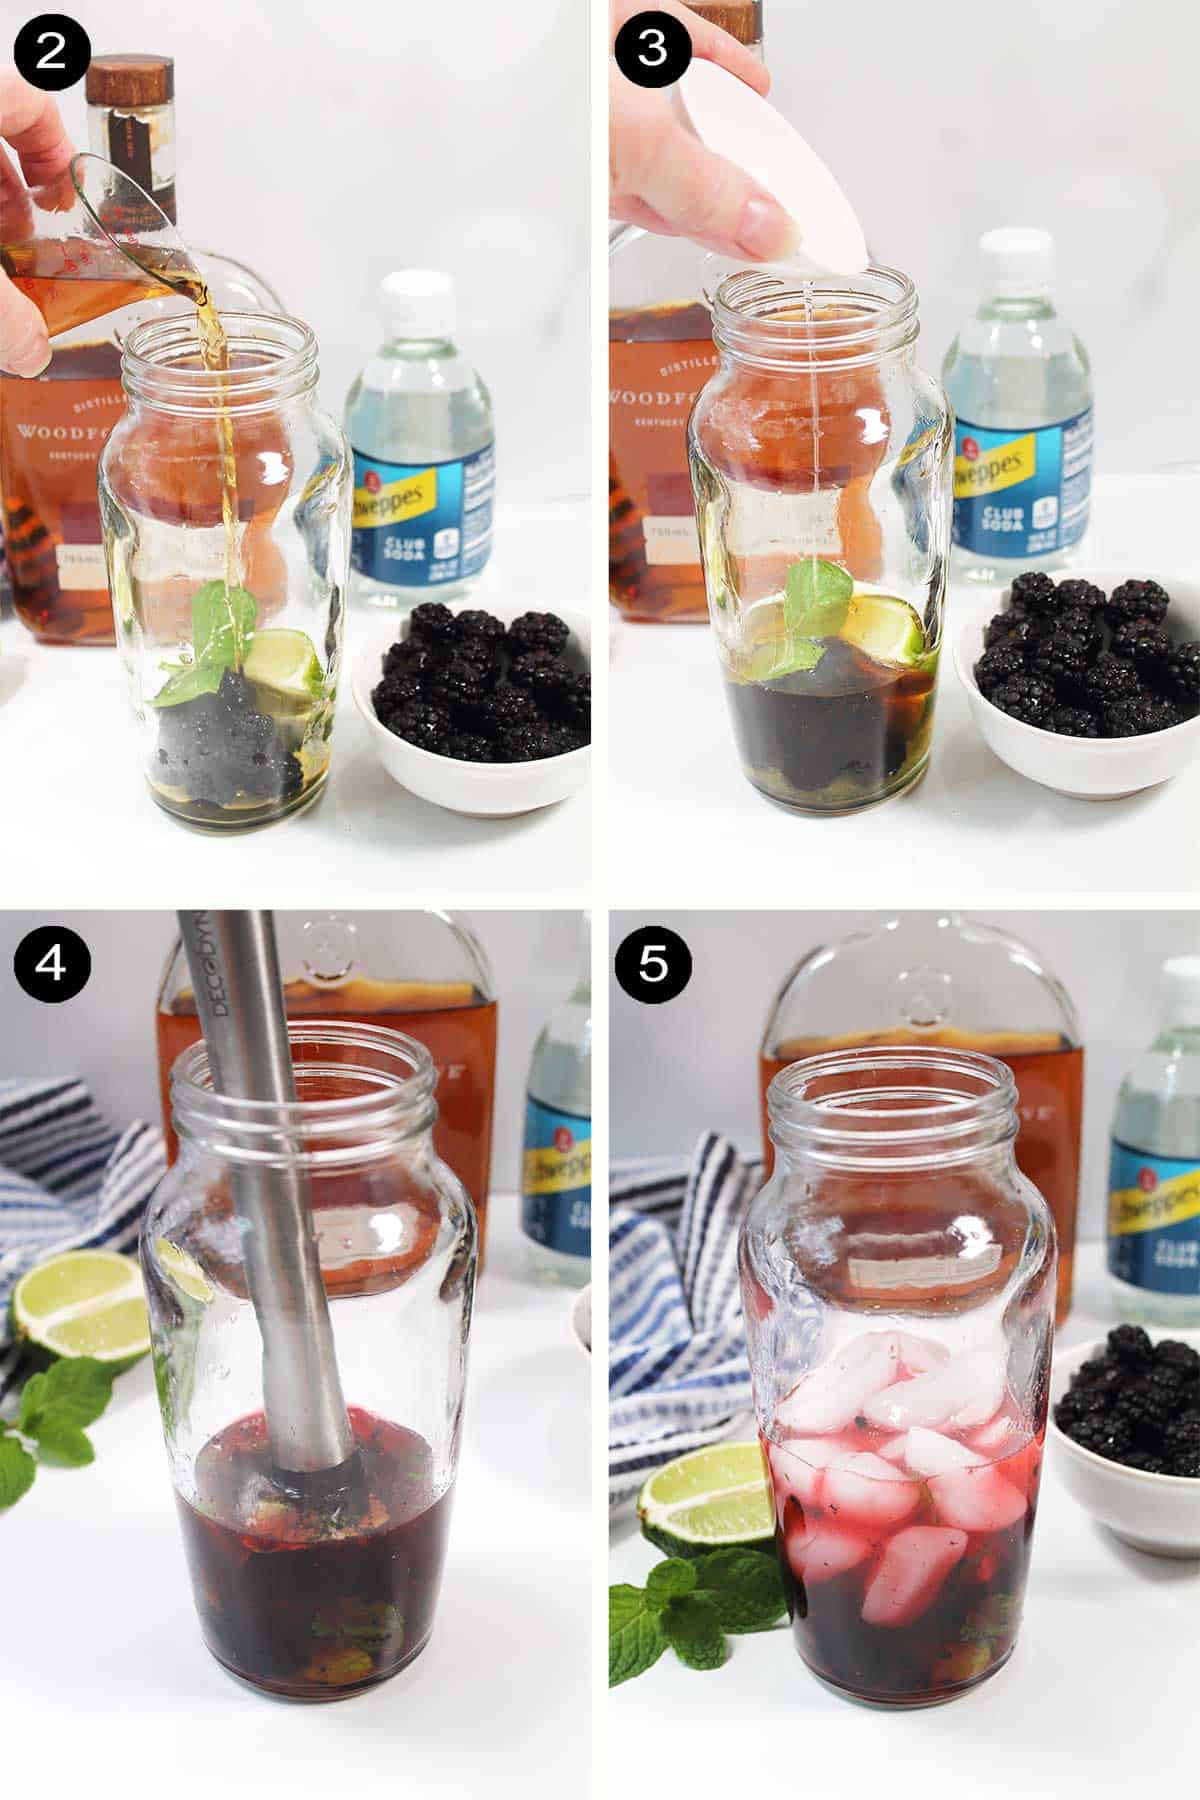 Steps to mix blackberry cocktail.